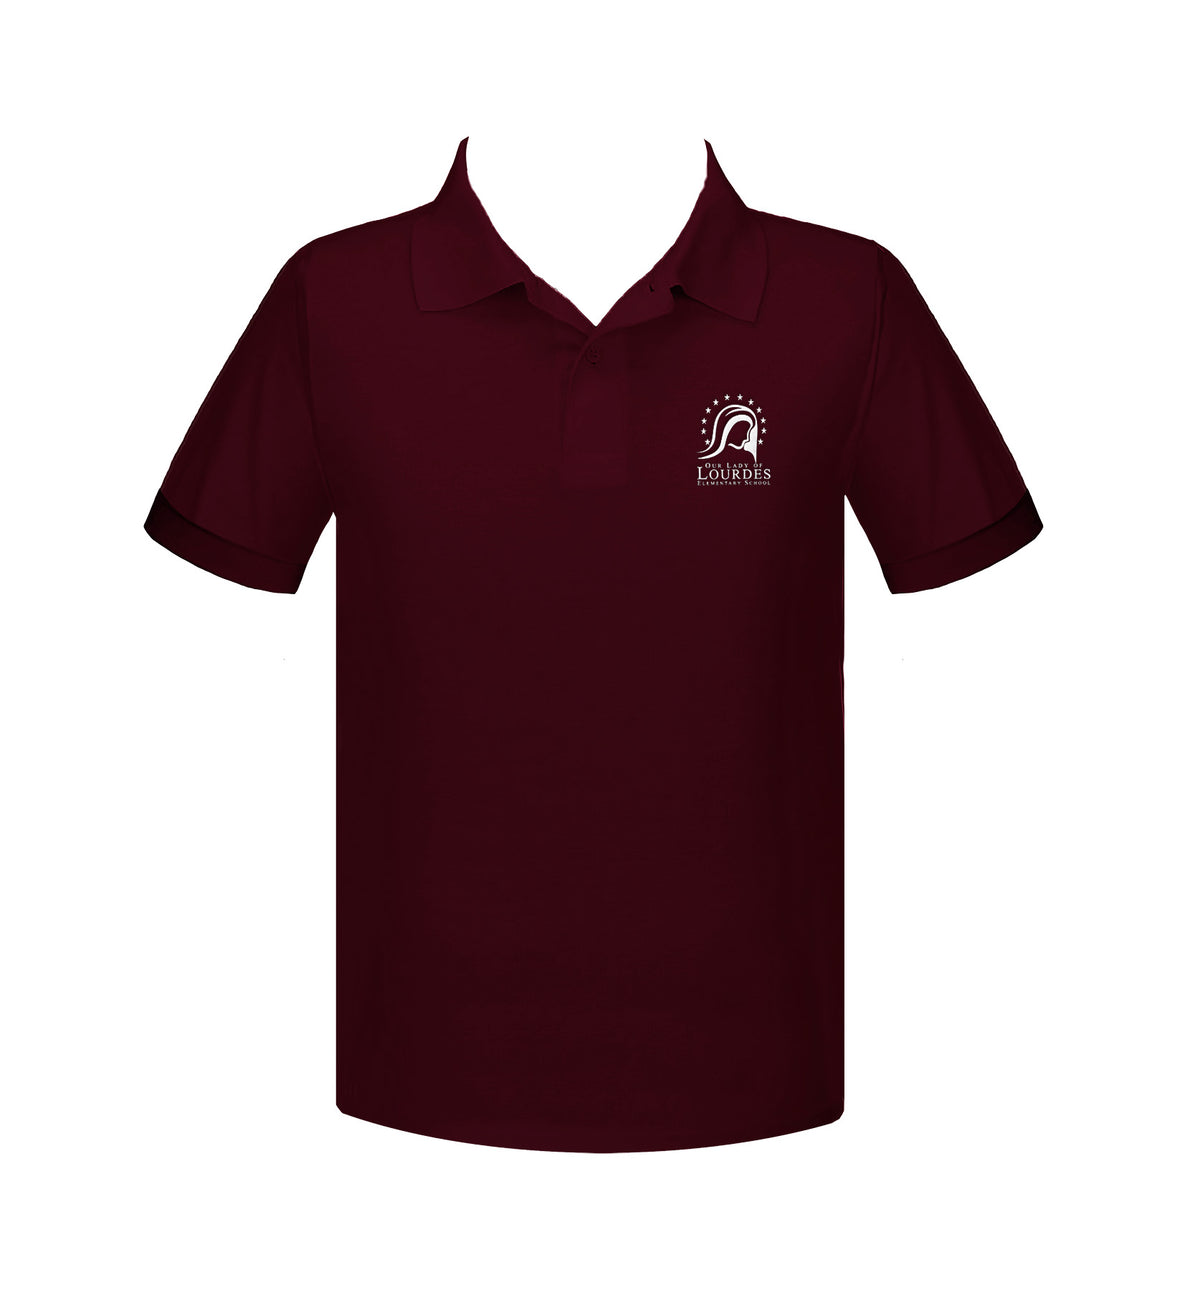 OUR LADY OF LOURDES GOLF SHIRT, SHORT SLEEVE, YOUTH